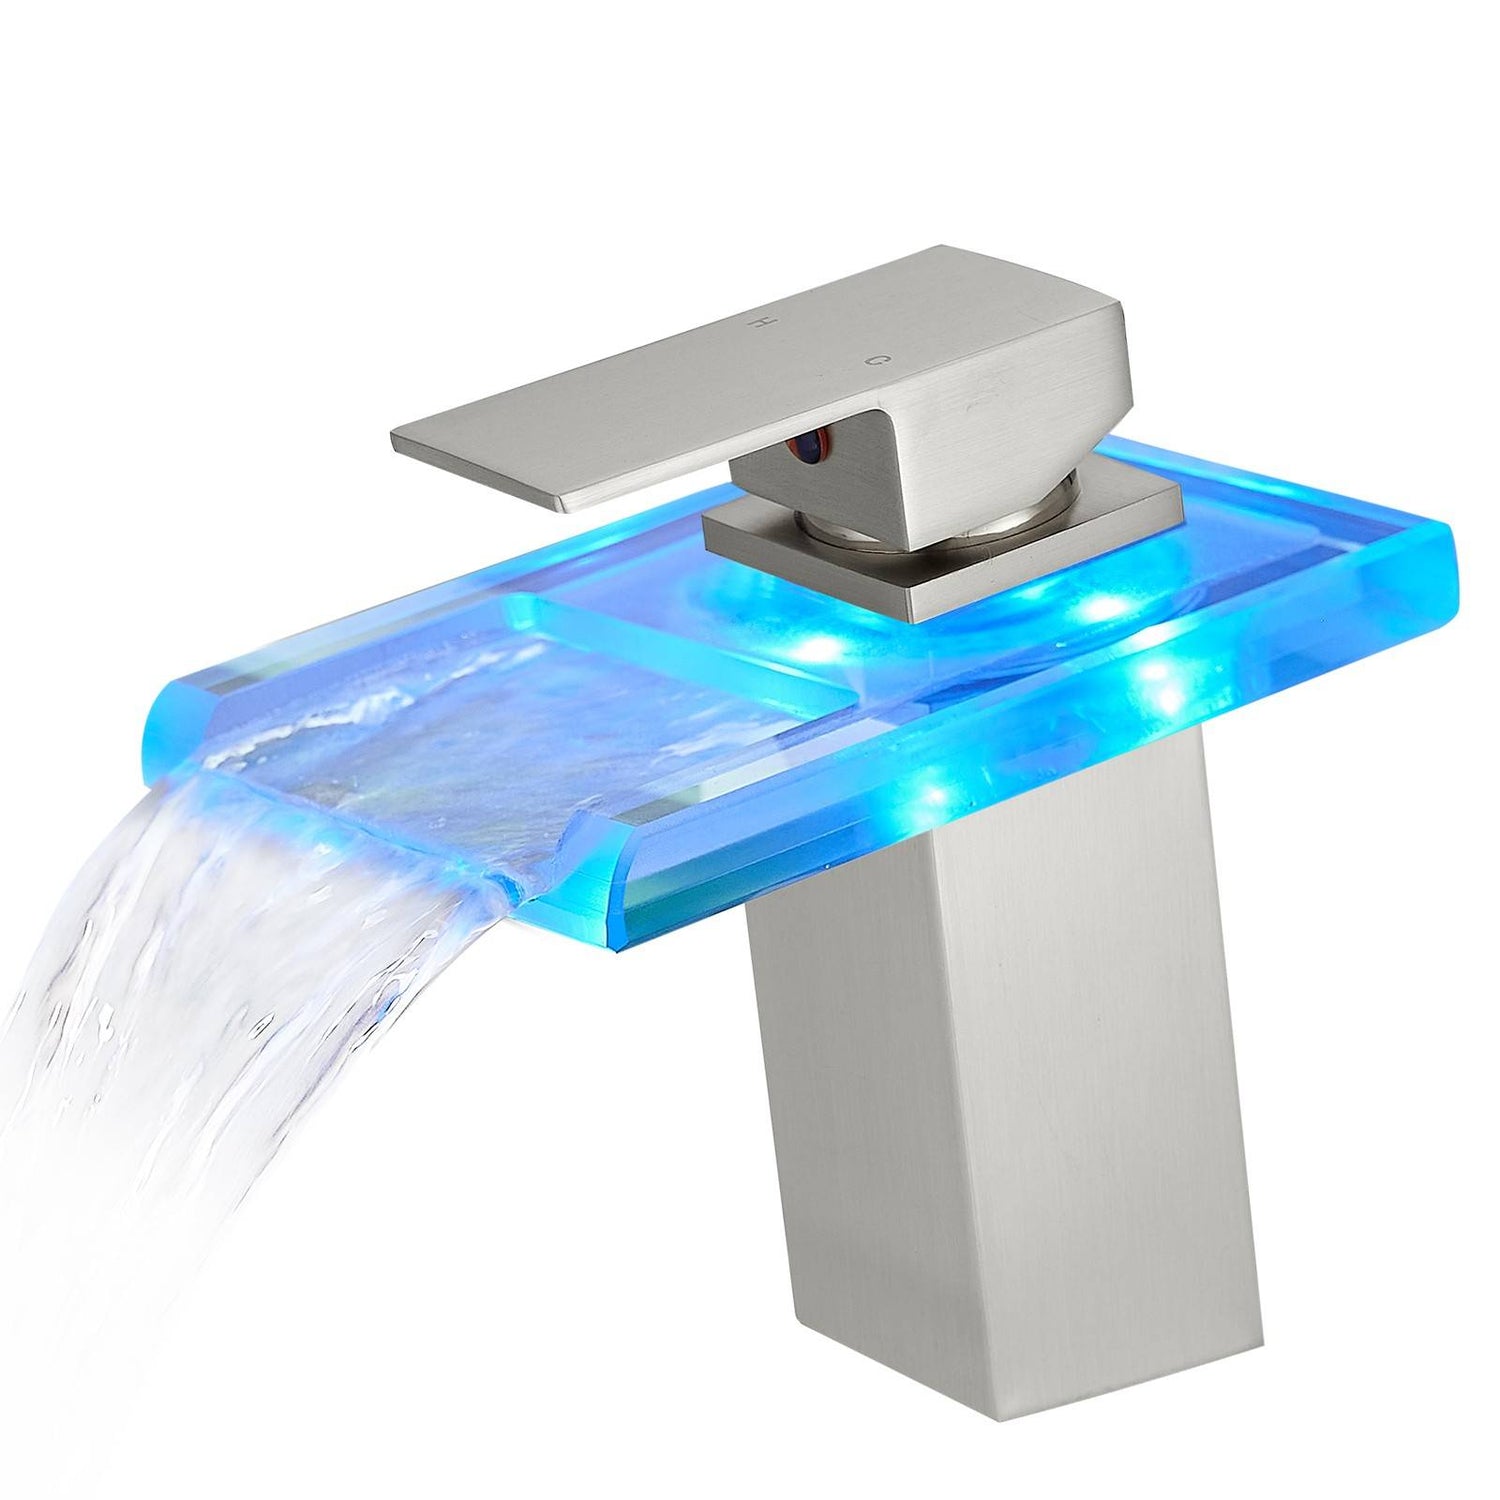 LED waterfall brushed nickel faucet